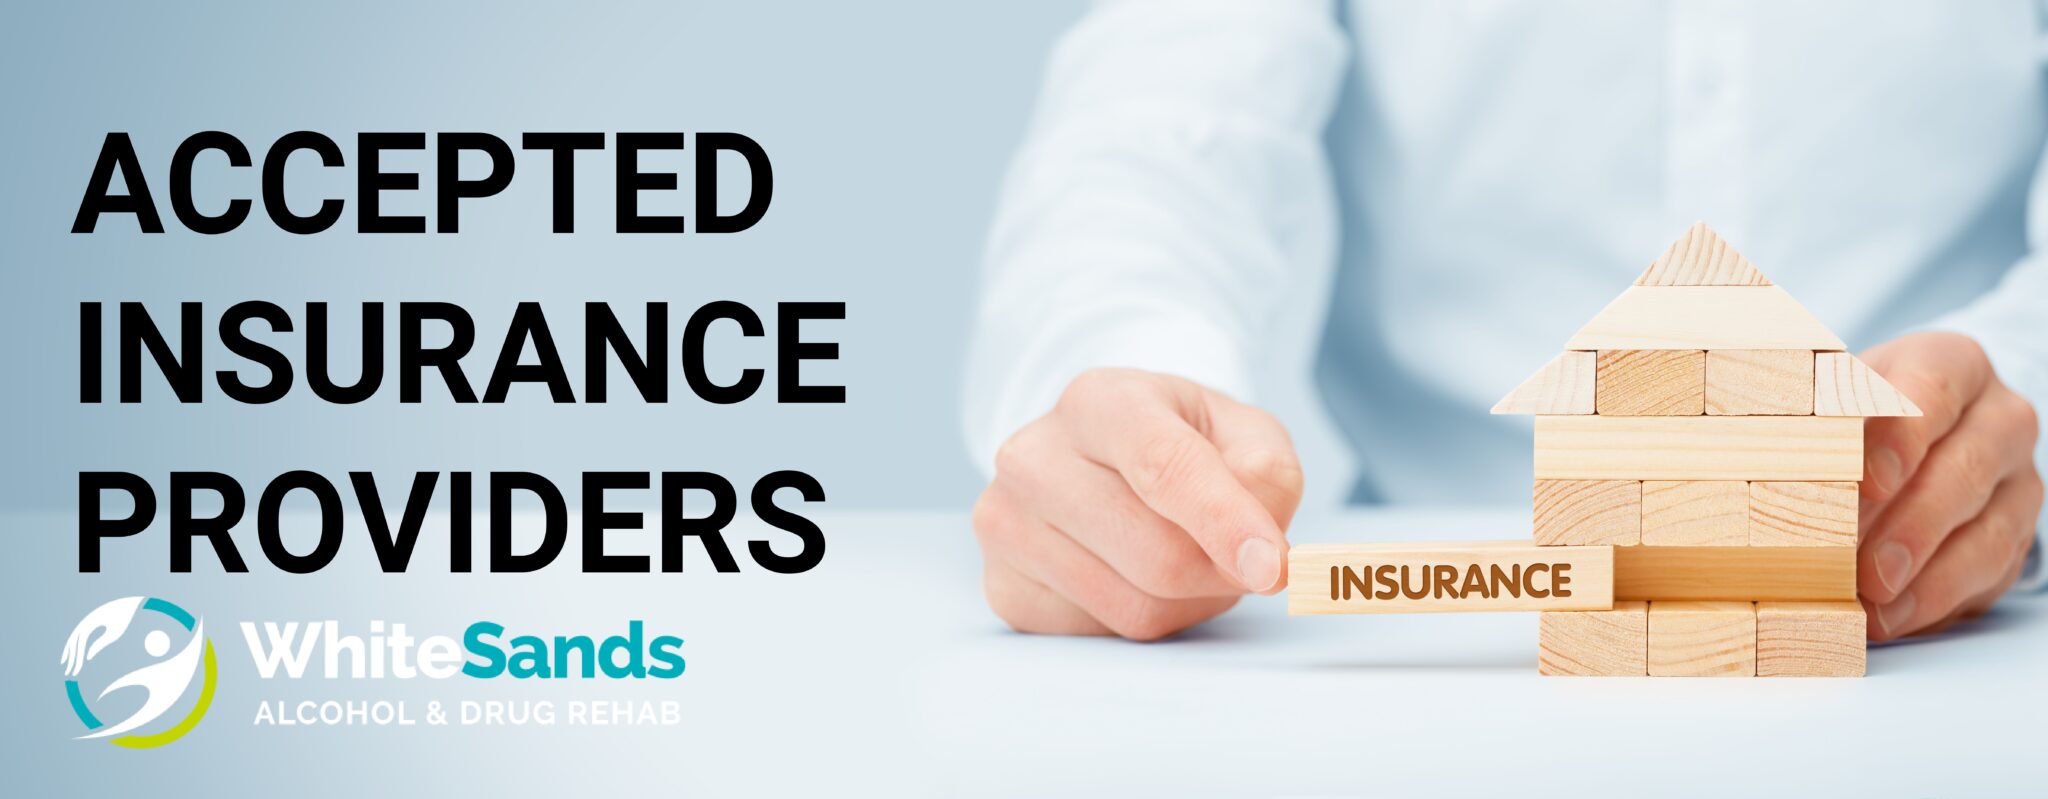 ACCEPTED INSURANCE PROVIDERS with Whitesands Treatment Centers